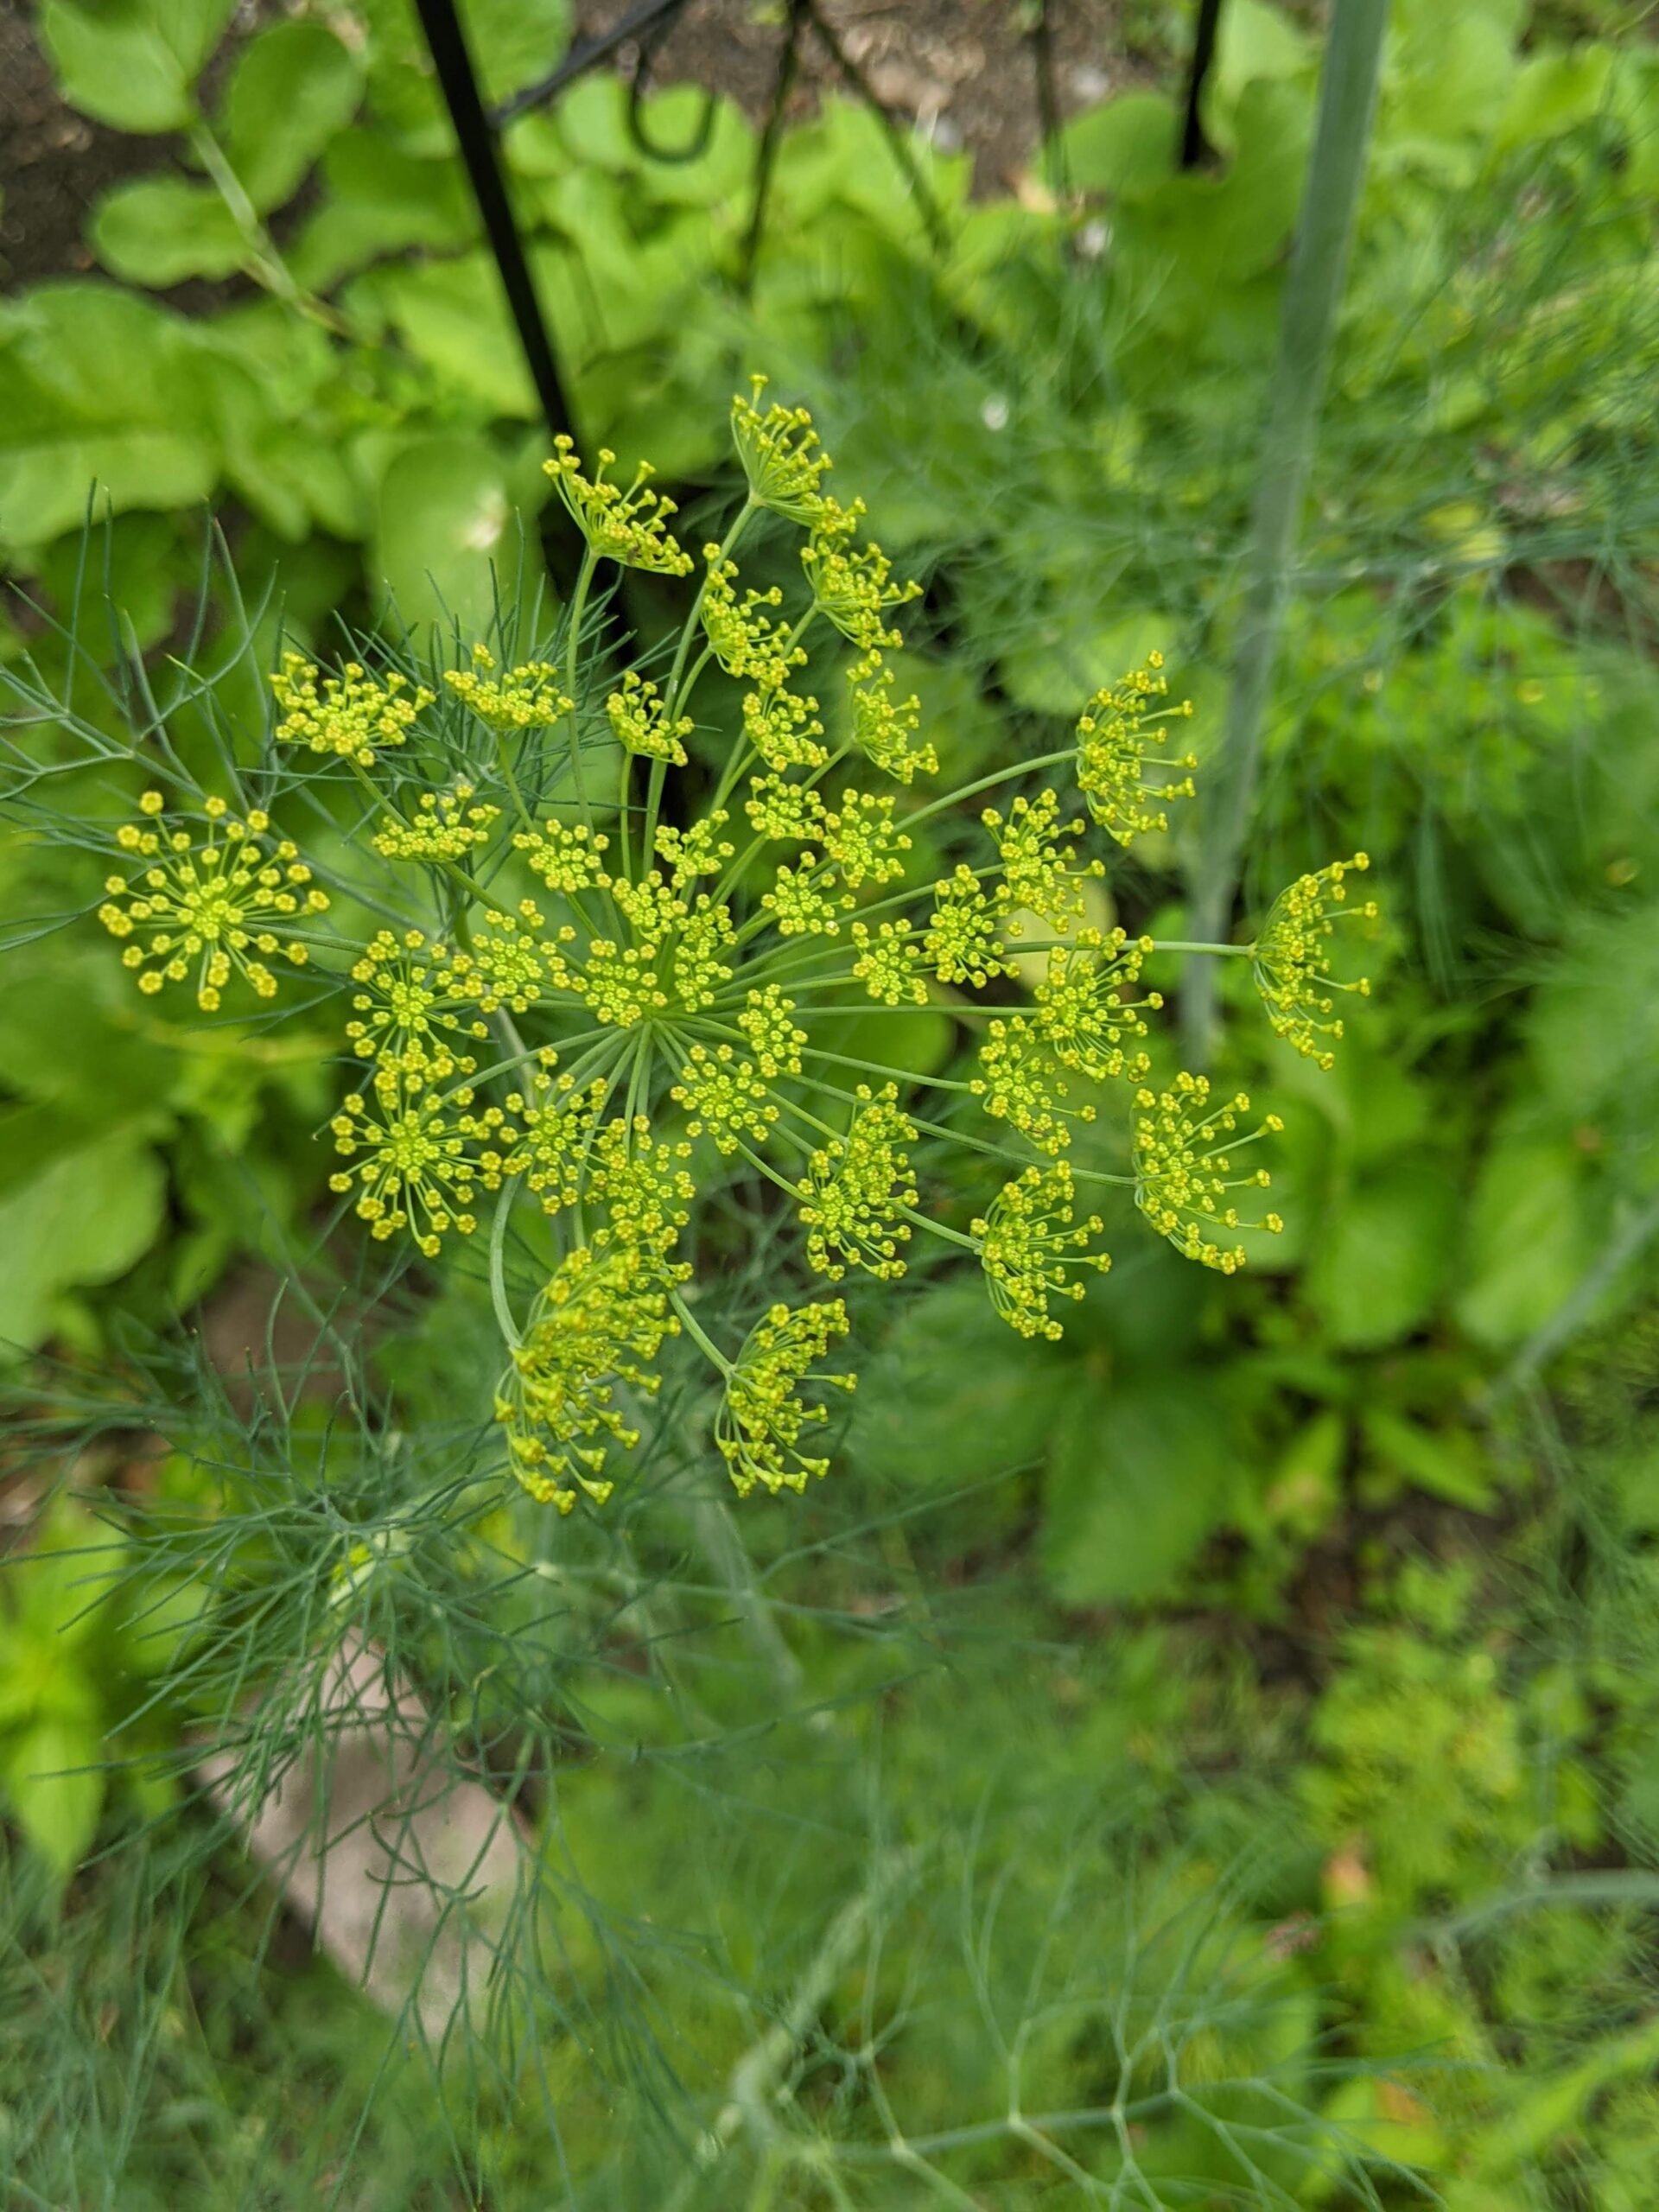 This is a dill plant with a yellow flower umbel on top